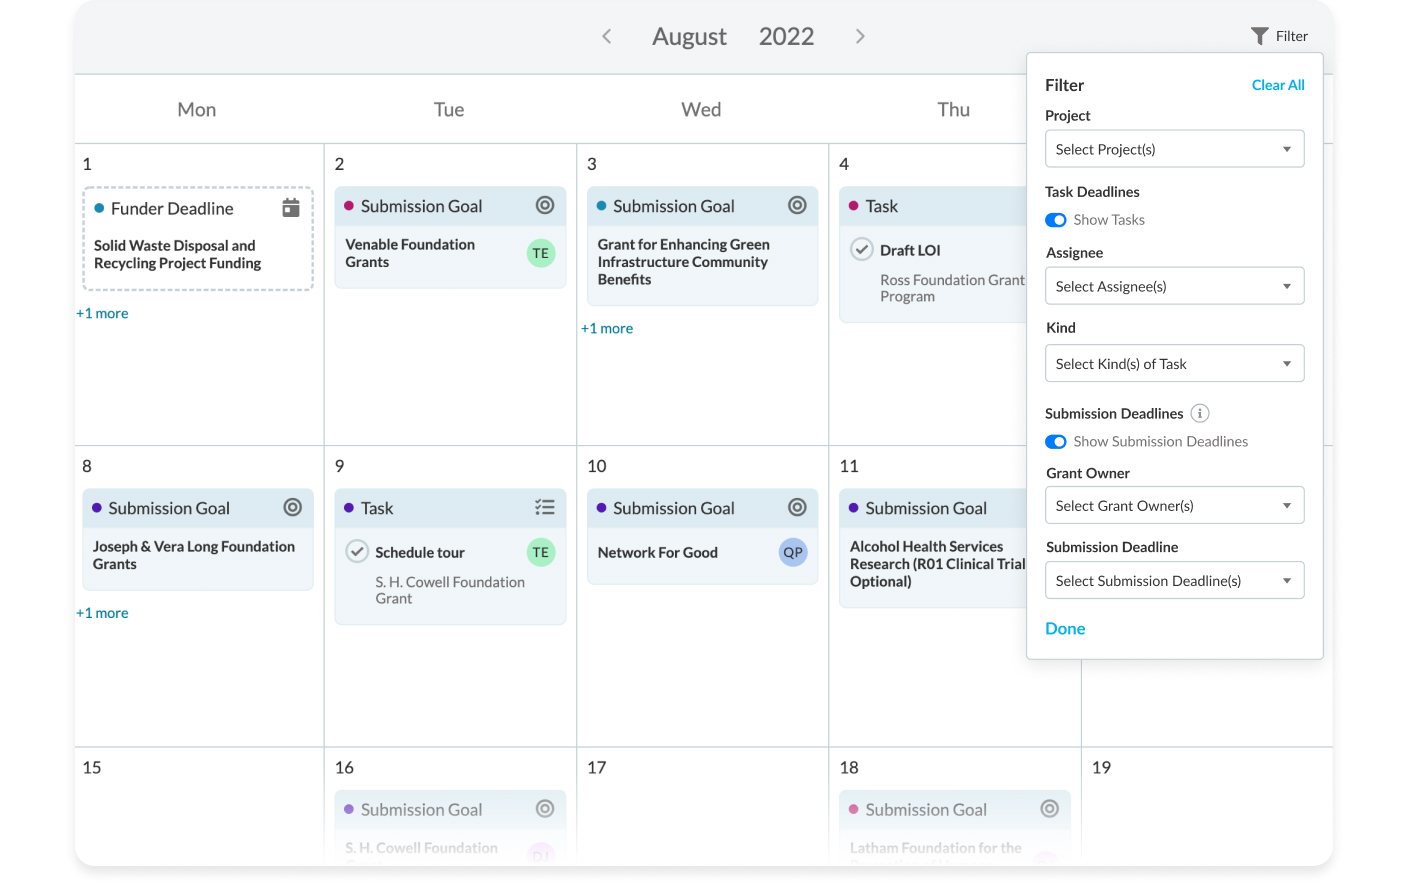 Stay on track by visualizing important deadlines in one calendar. The calendar displays all task deadlines, funder deadlines, submission goals, and future cycles so teams never miss grant deadlines and deliverables. Available on Standard or above.